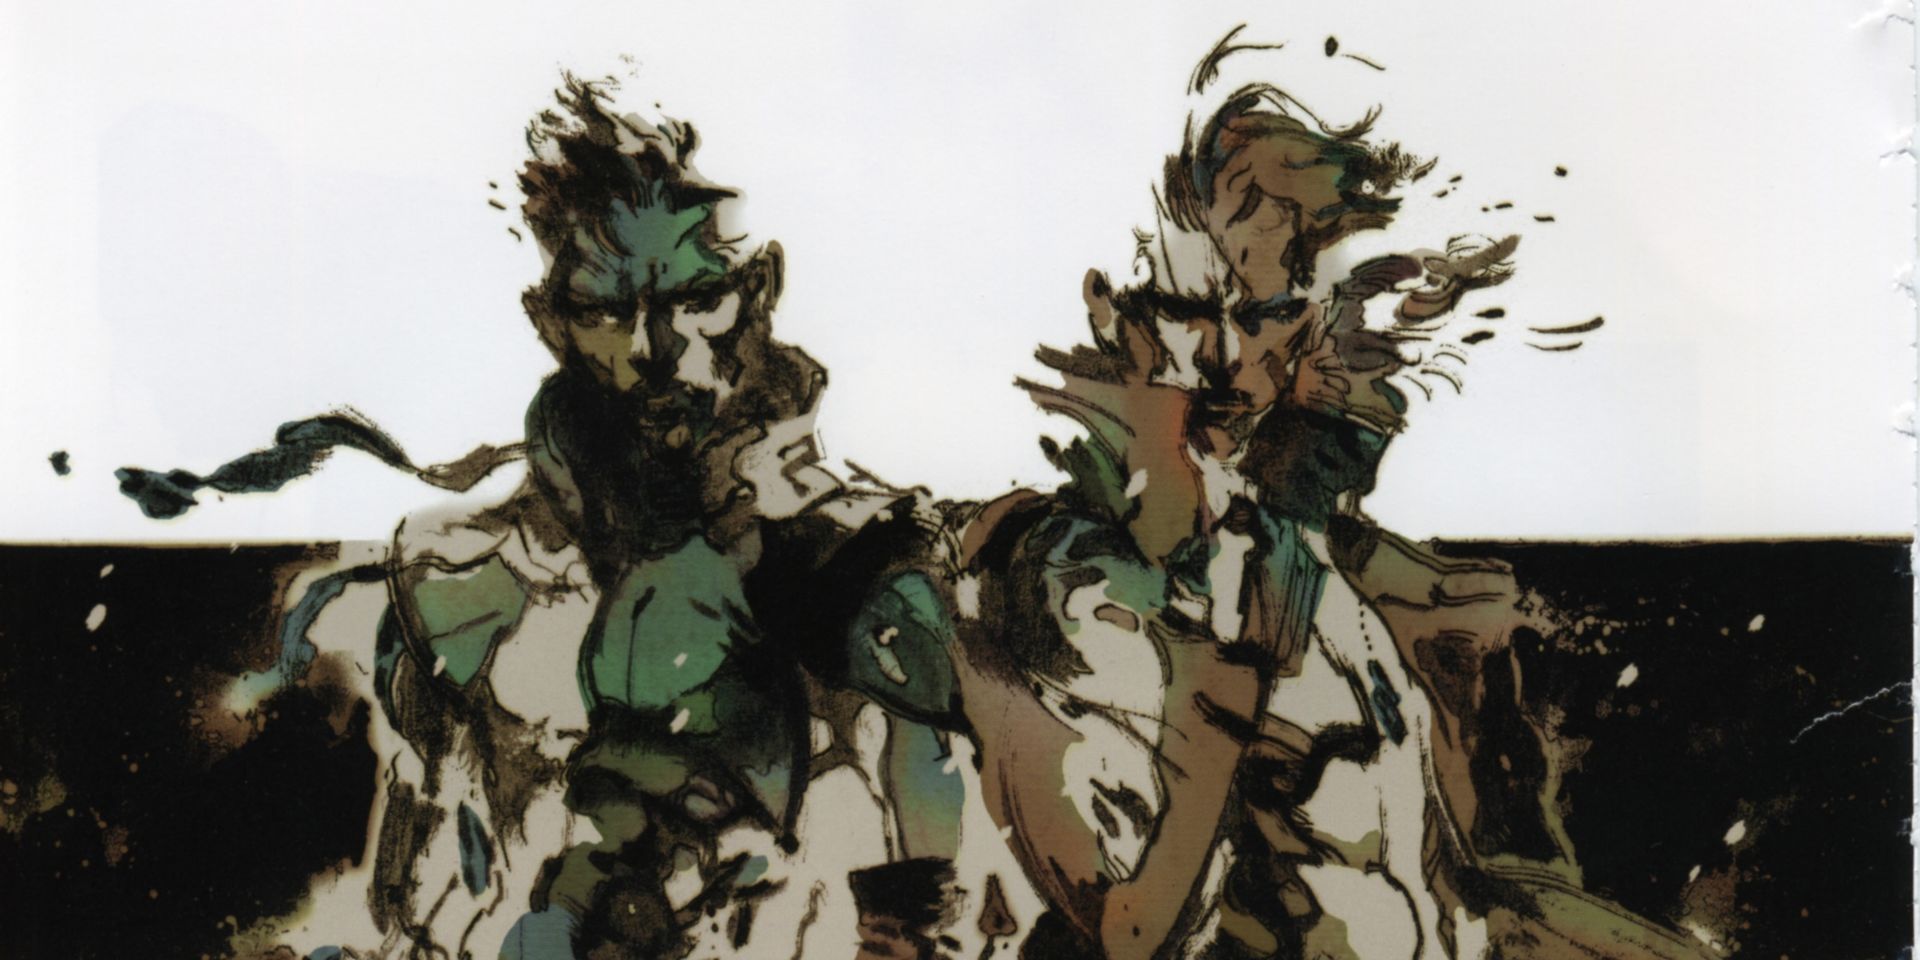 concept art of metal gear solid picturing Solid Snake and another character